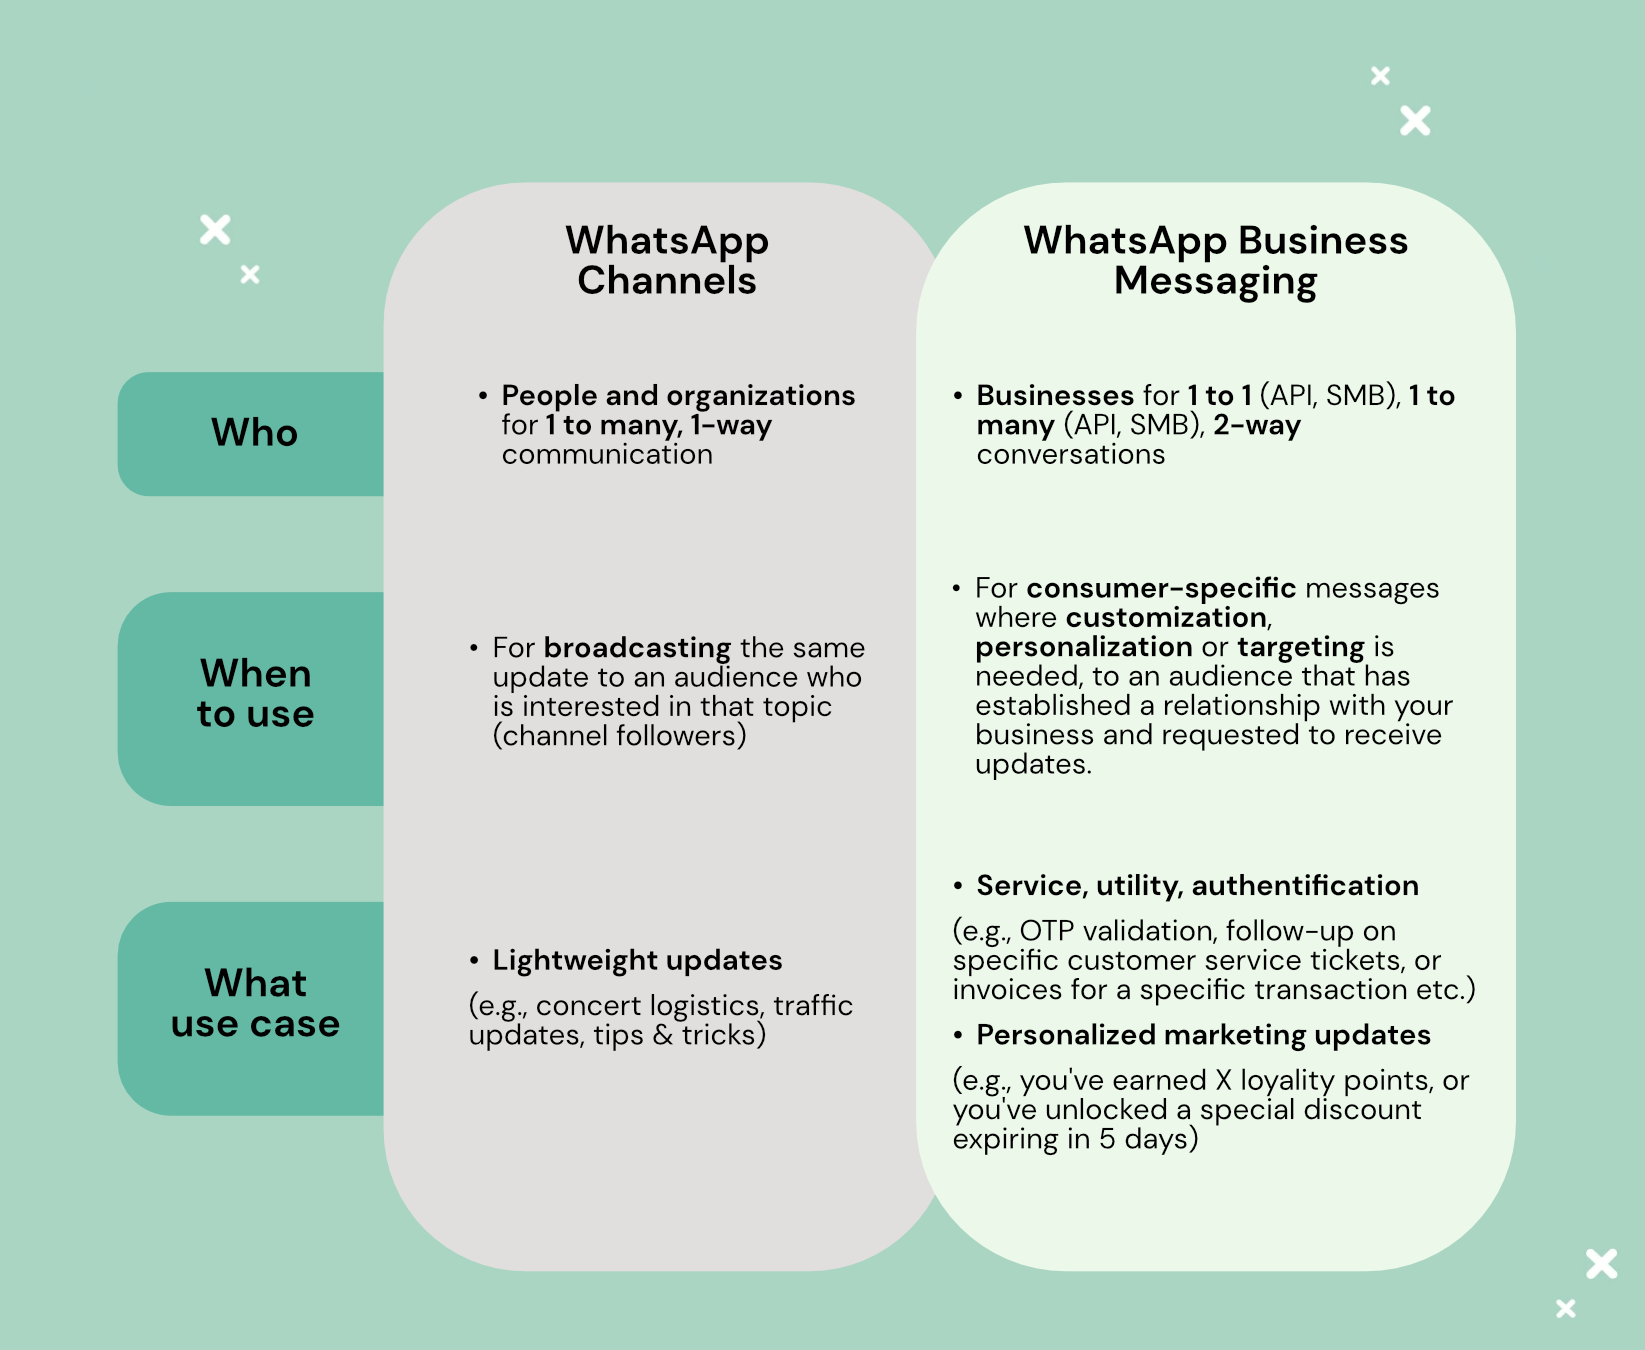 differences WhatsApp Channels and WhatsApp Business messaging